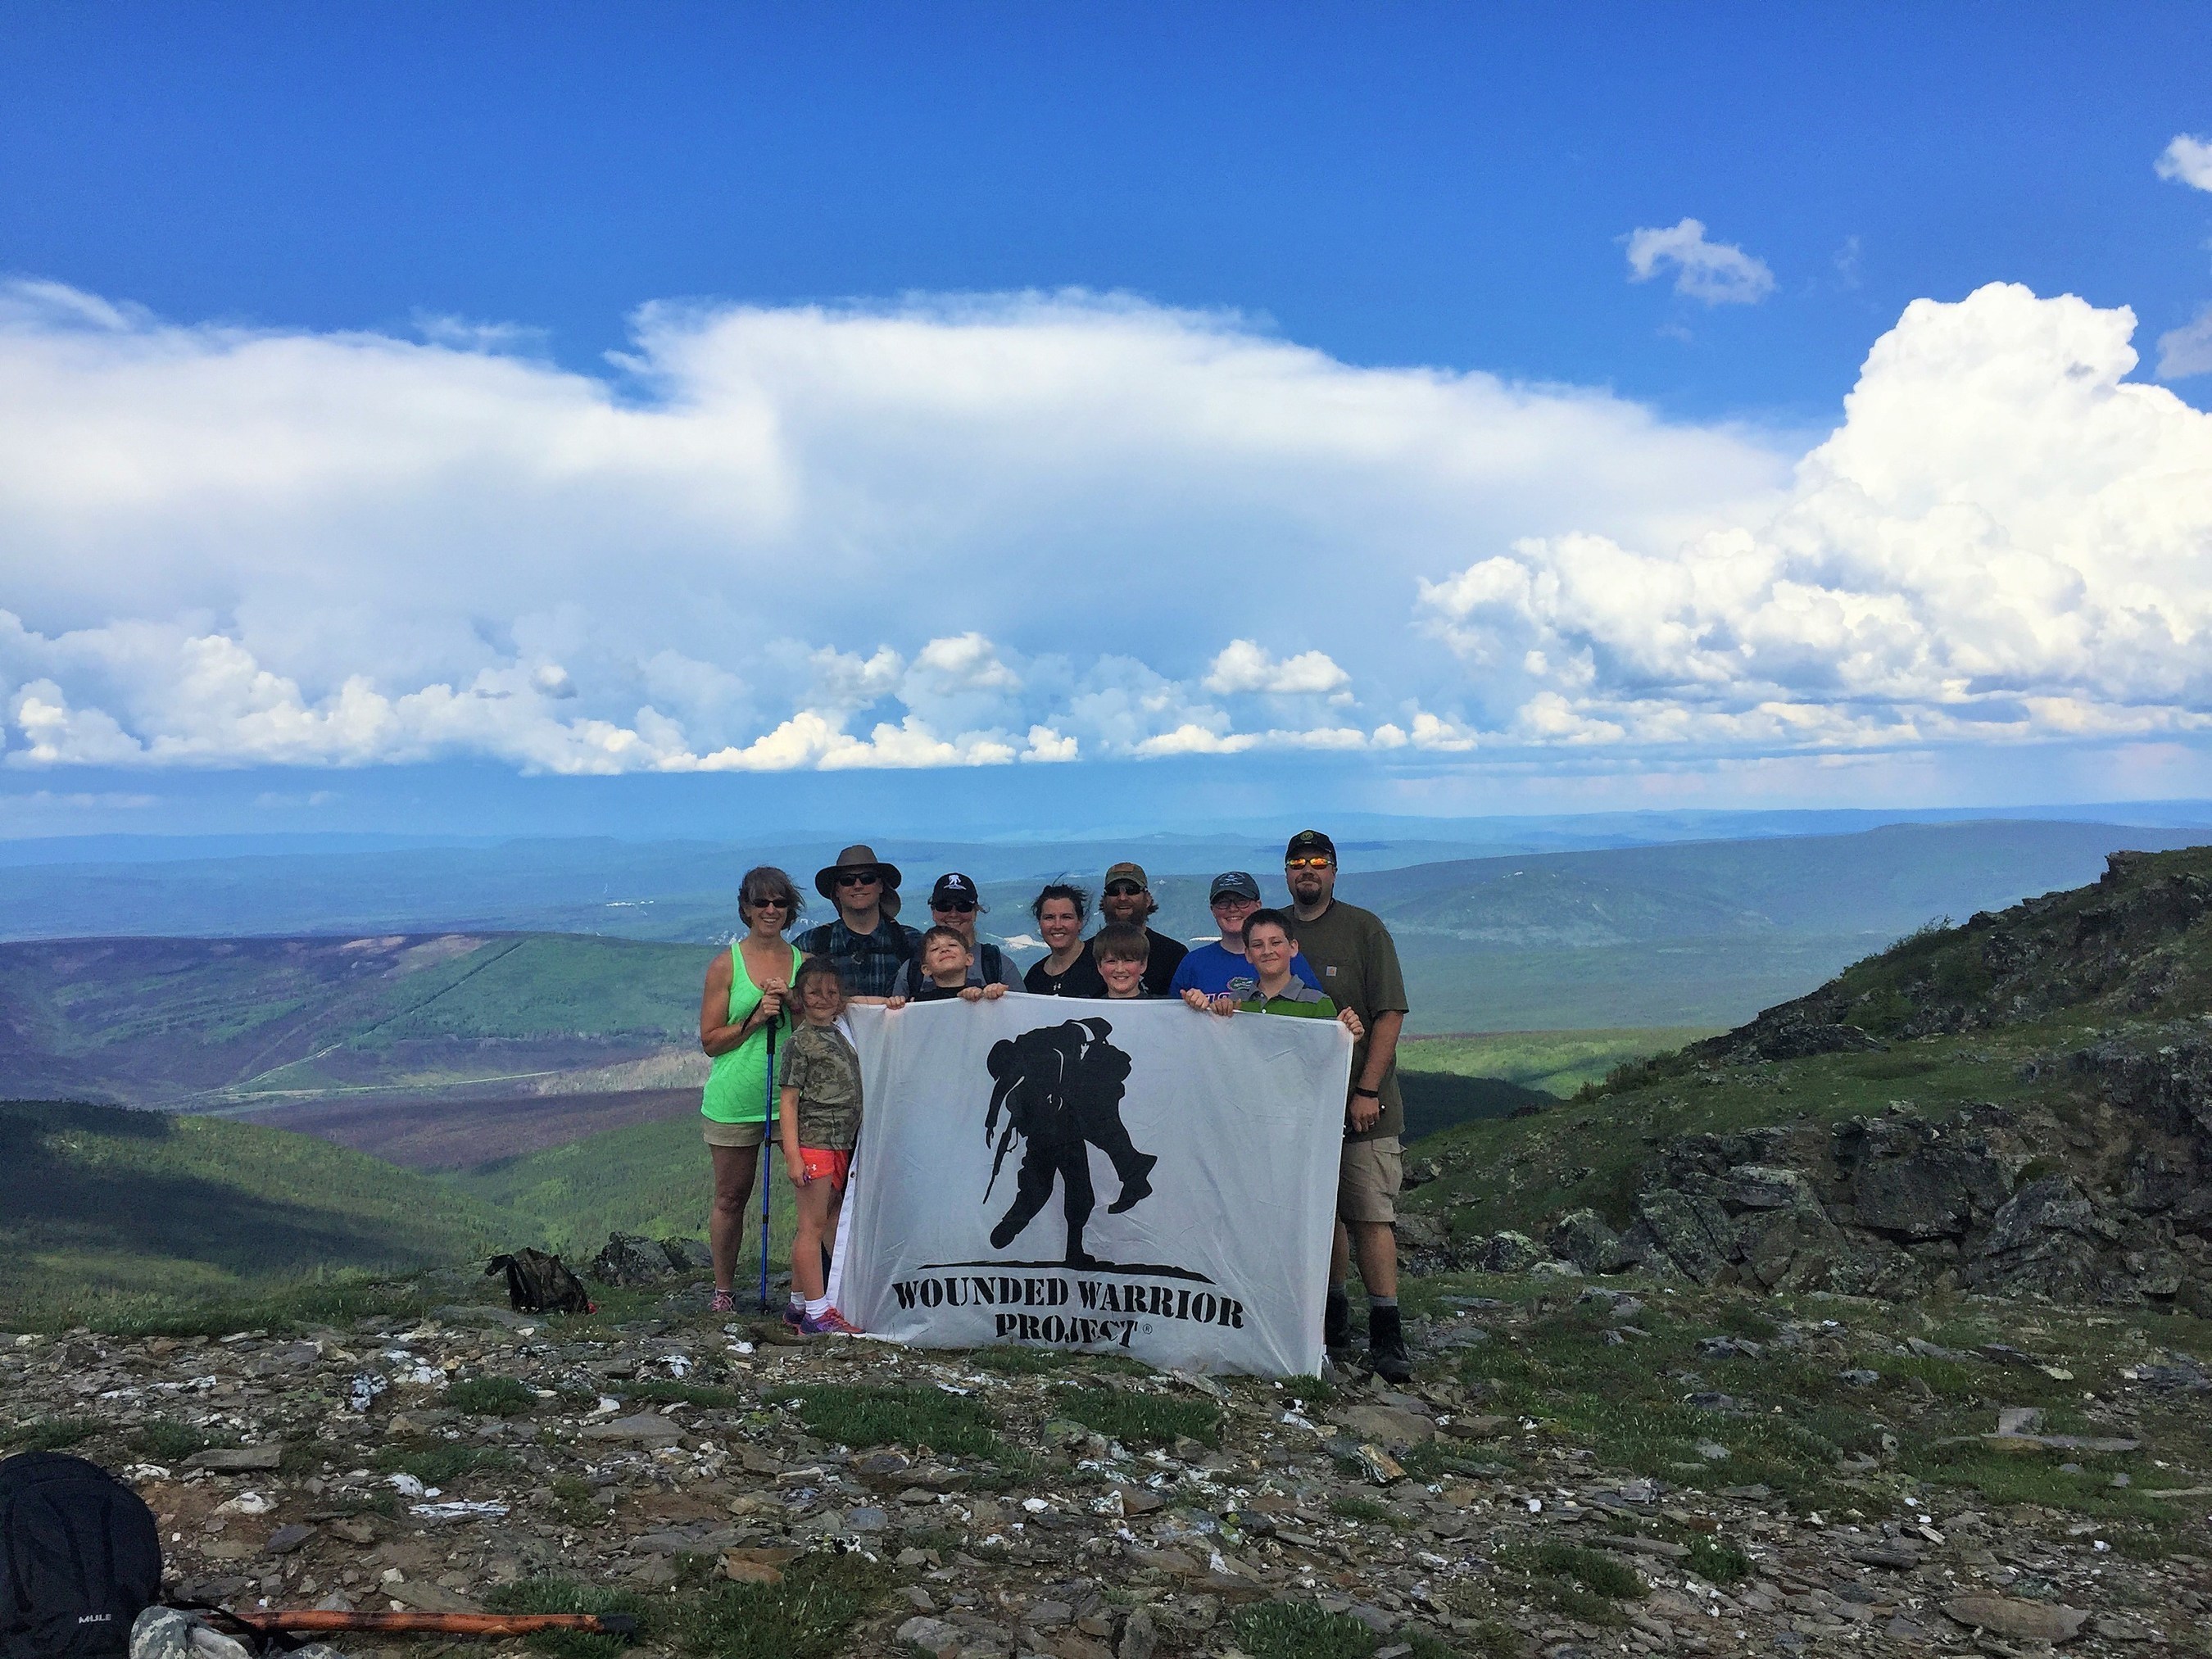 Wounded Warrior Project is hosting an interior hike challenge in Fox, Alaska. The hikes are scheduled to increase in challenge level as the season progresses.